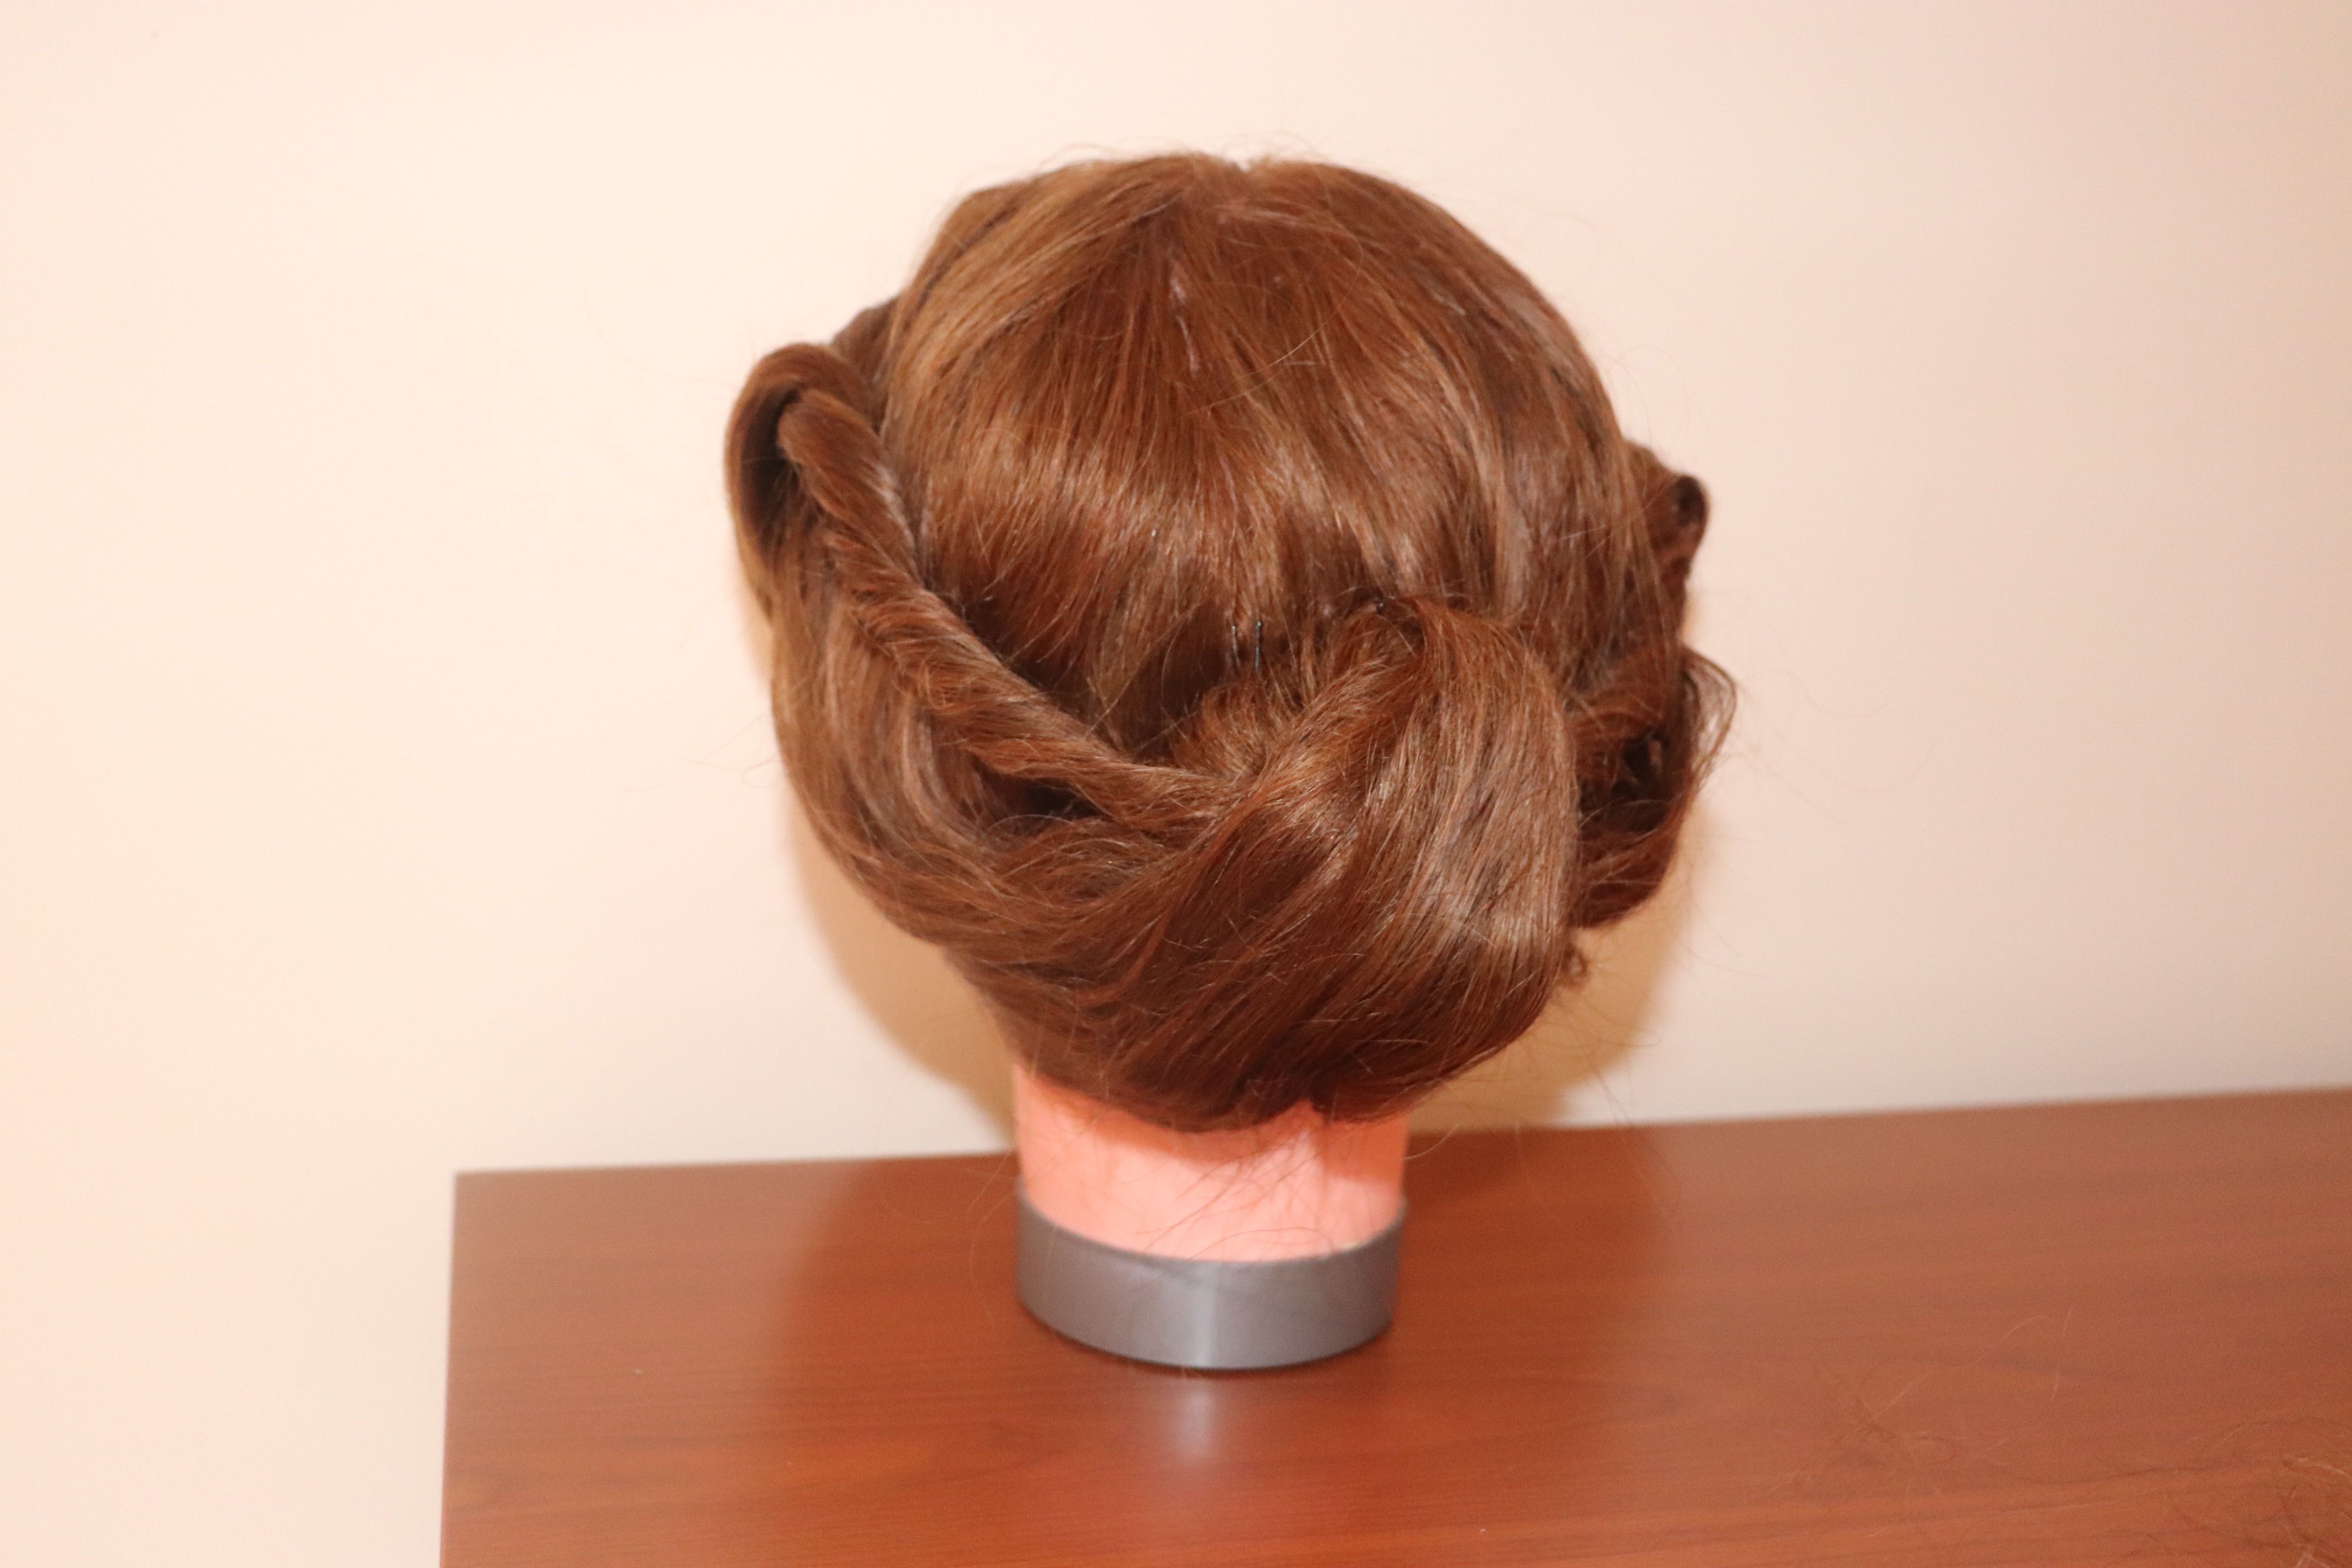 Styling With A Messy Bun Hairstyle – Up Styles 2019 Intended For Most Recently Released Messy Bun Hairstyles (View 19 of 20)